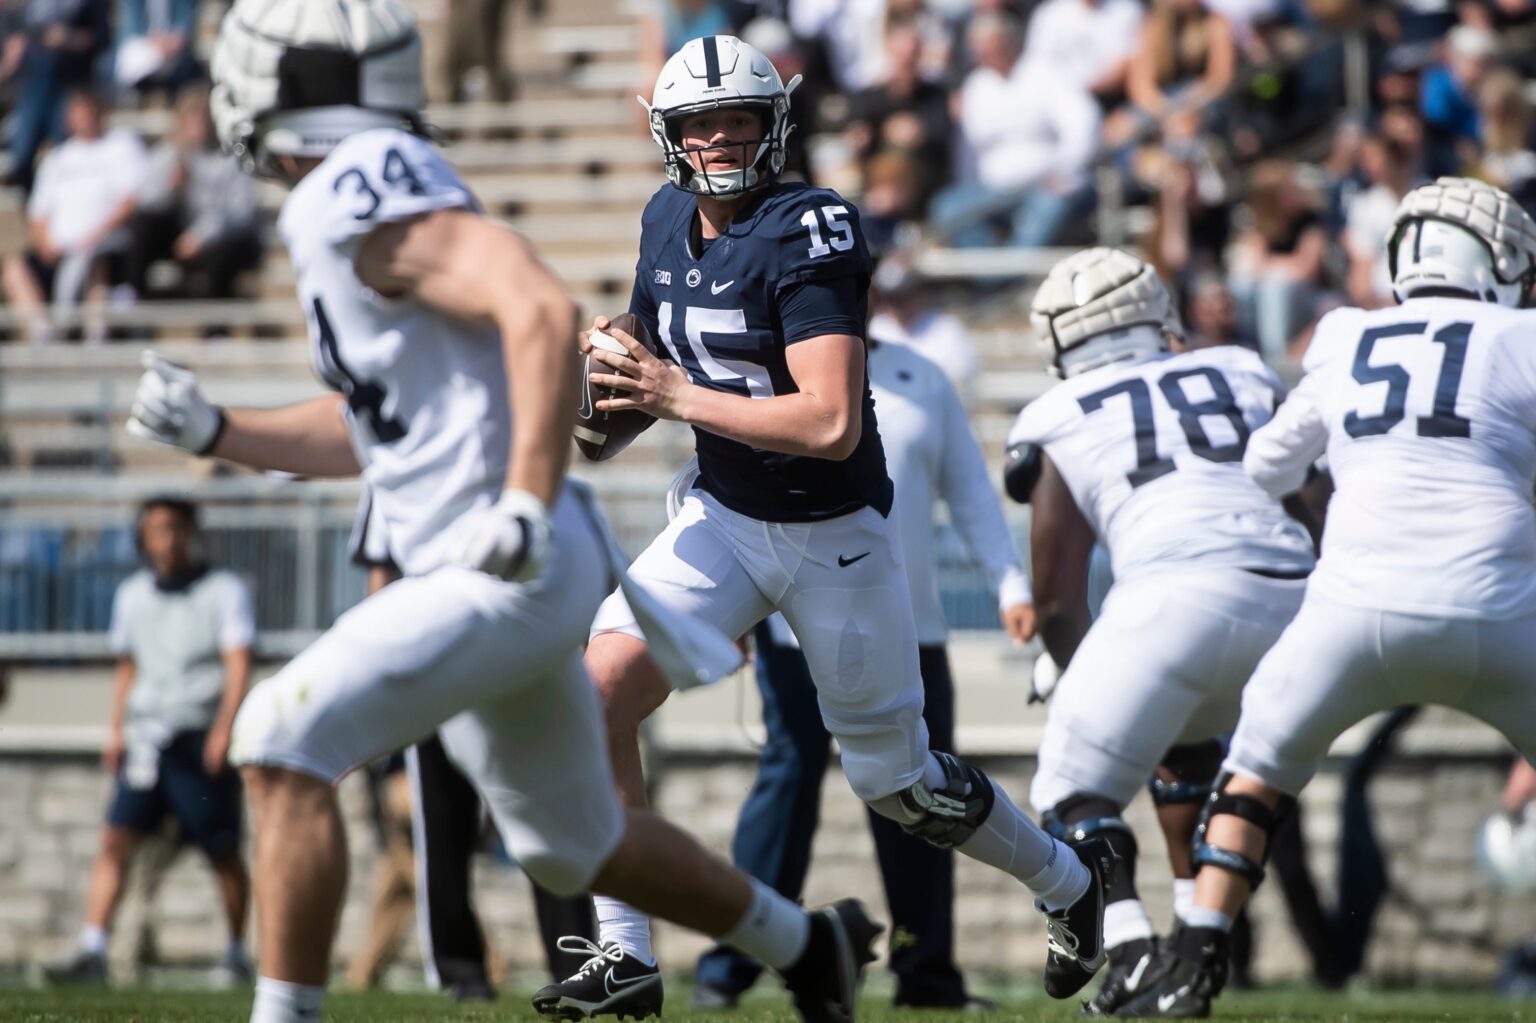 Penn State BlueWhite Game named a must watch spring game